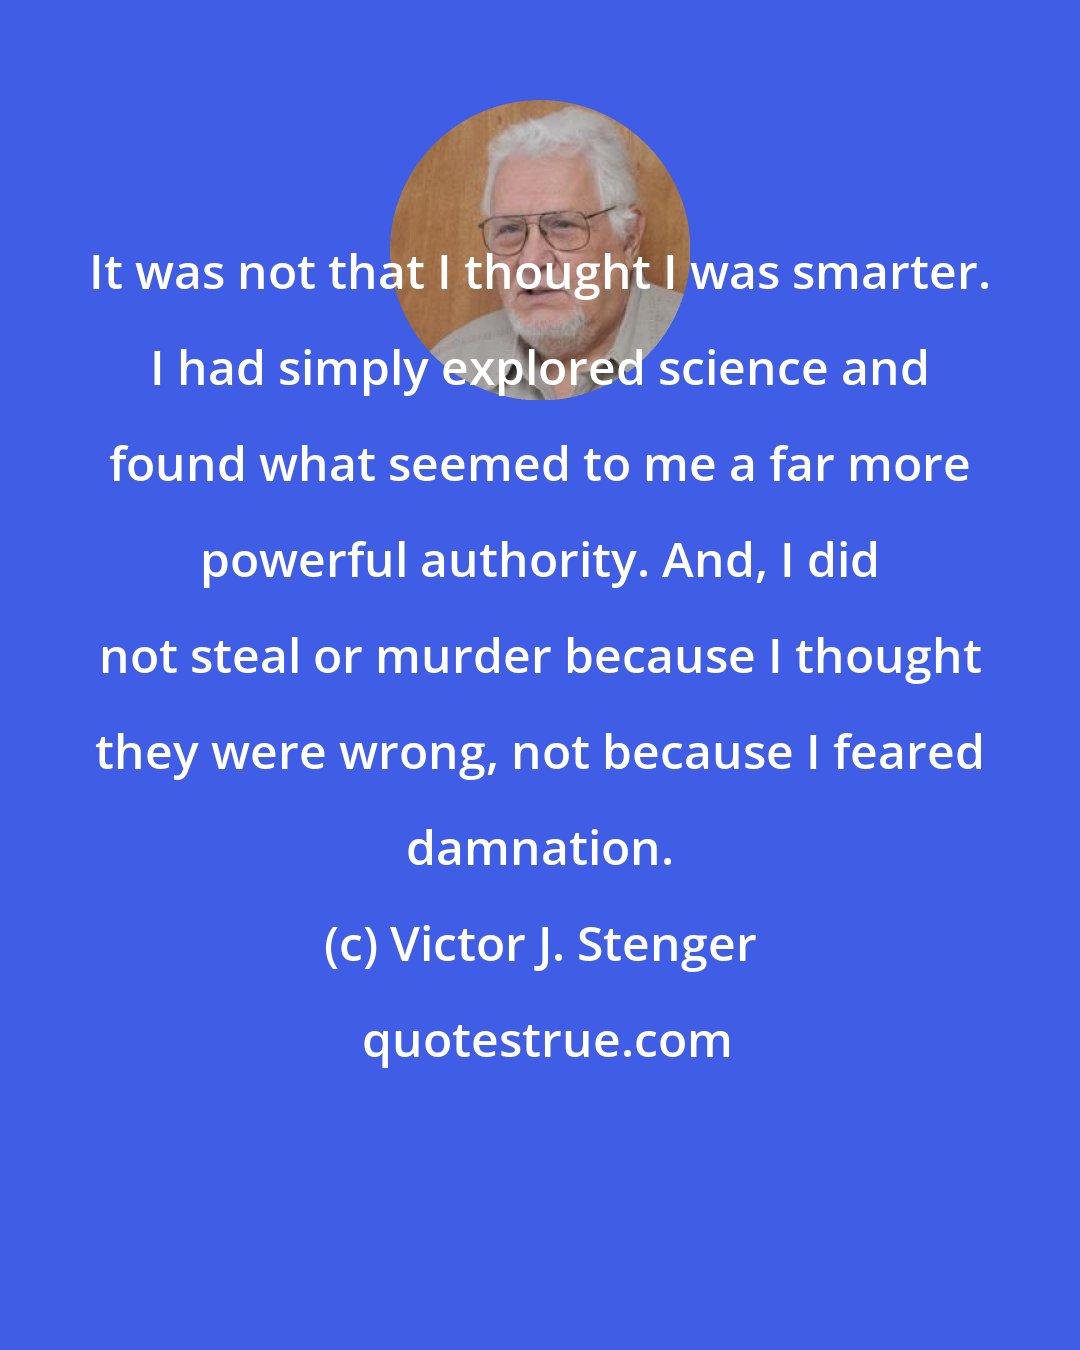 Victor J. Stenger: It was not that I thought I was smarter. I had simply explored science and found what seemed to me a far more powerful authority. And, I did not steal or murder because I thought they were wrong, not because I feared damnation.